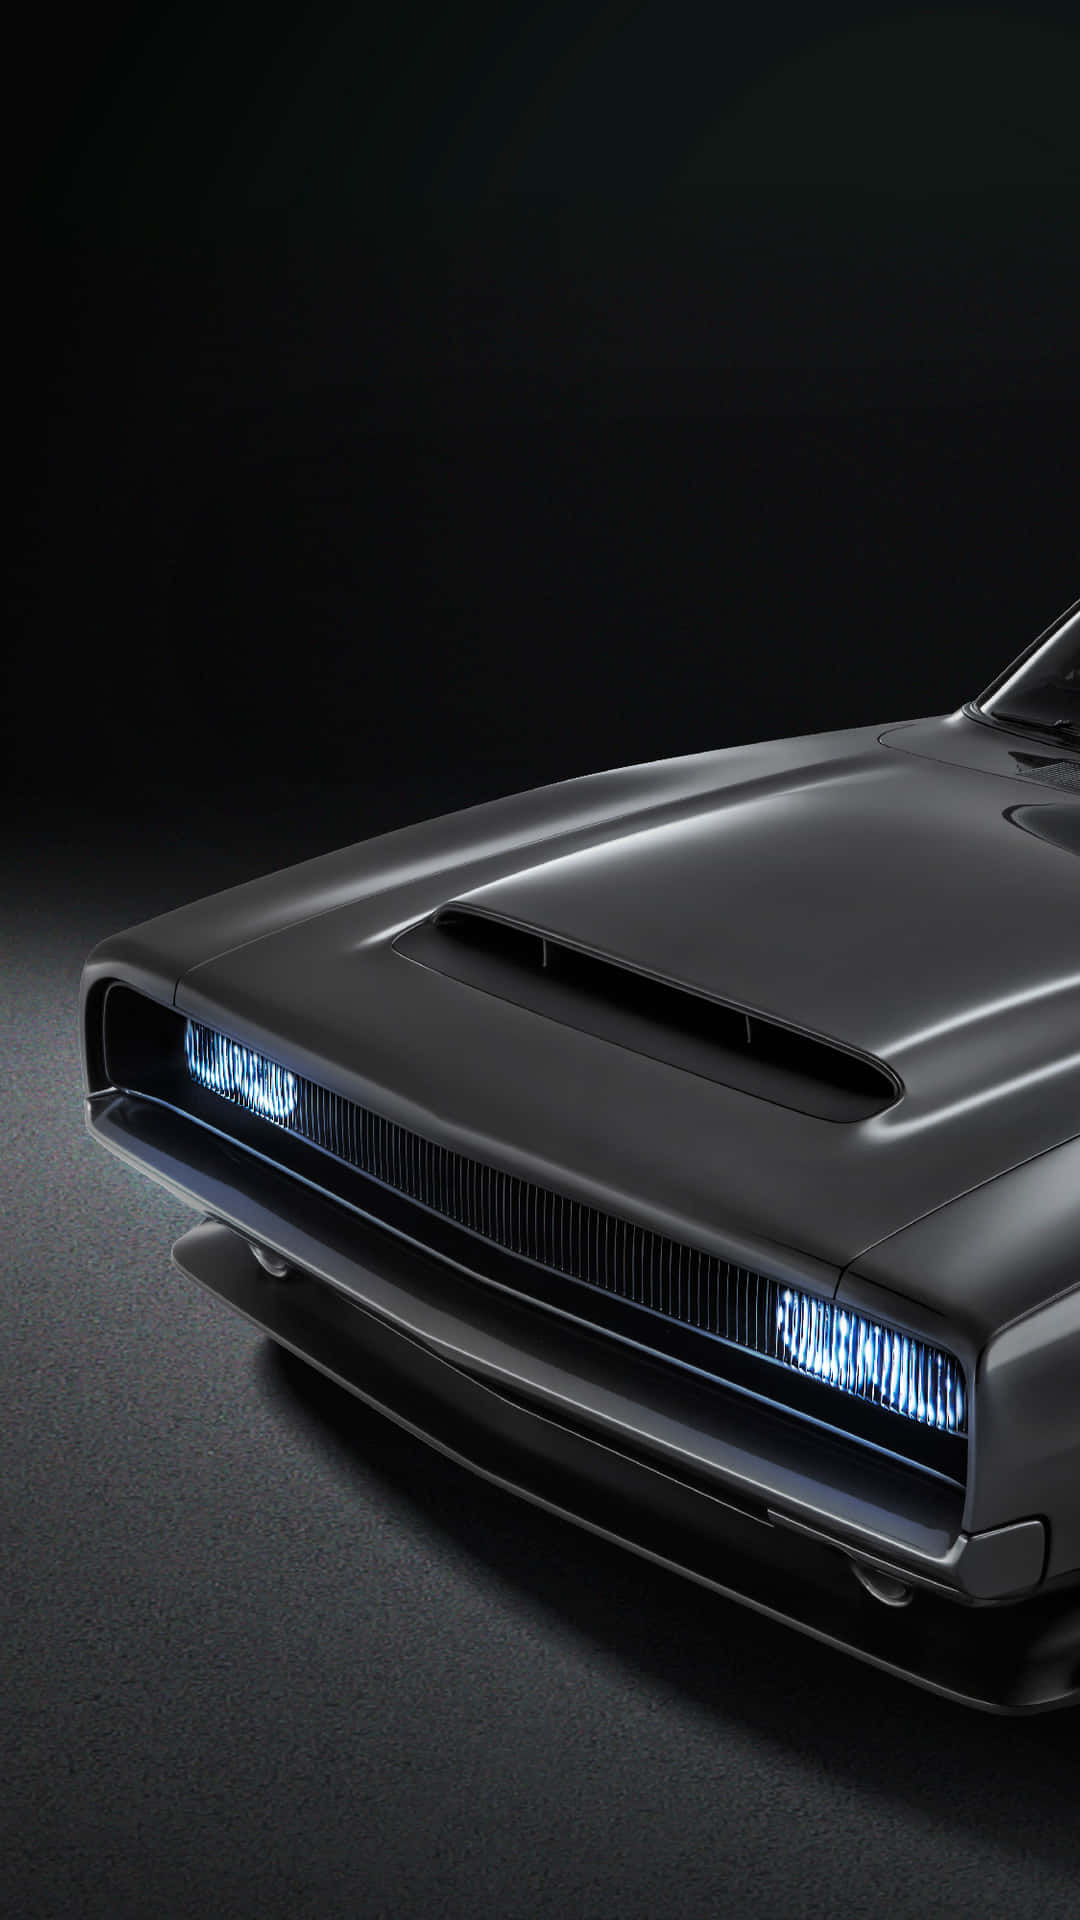 Unstoppable muscle with the Dodge Charger Wallpaper